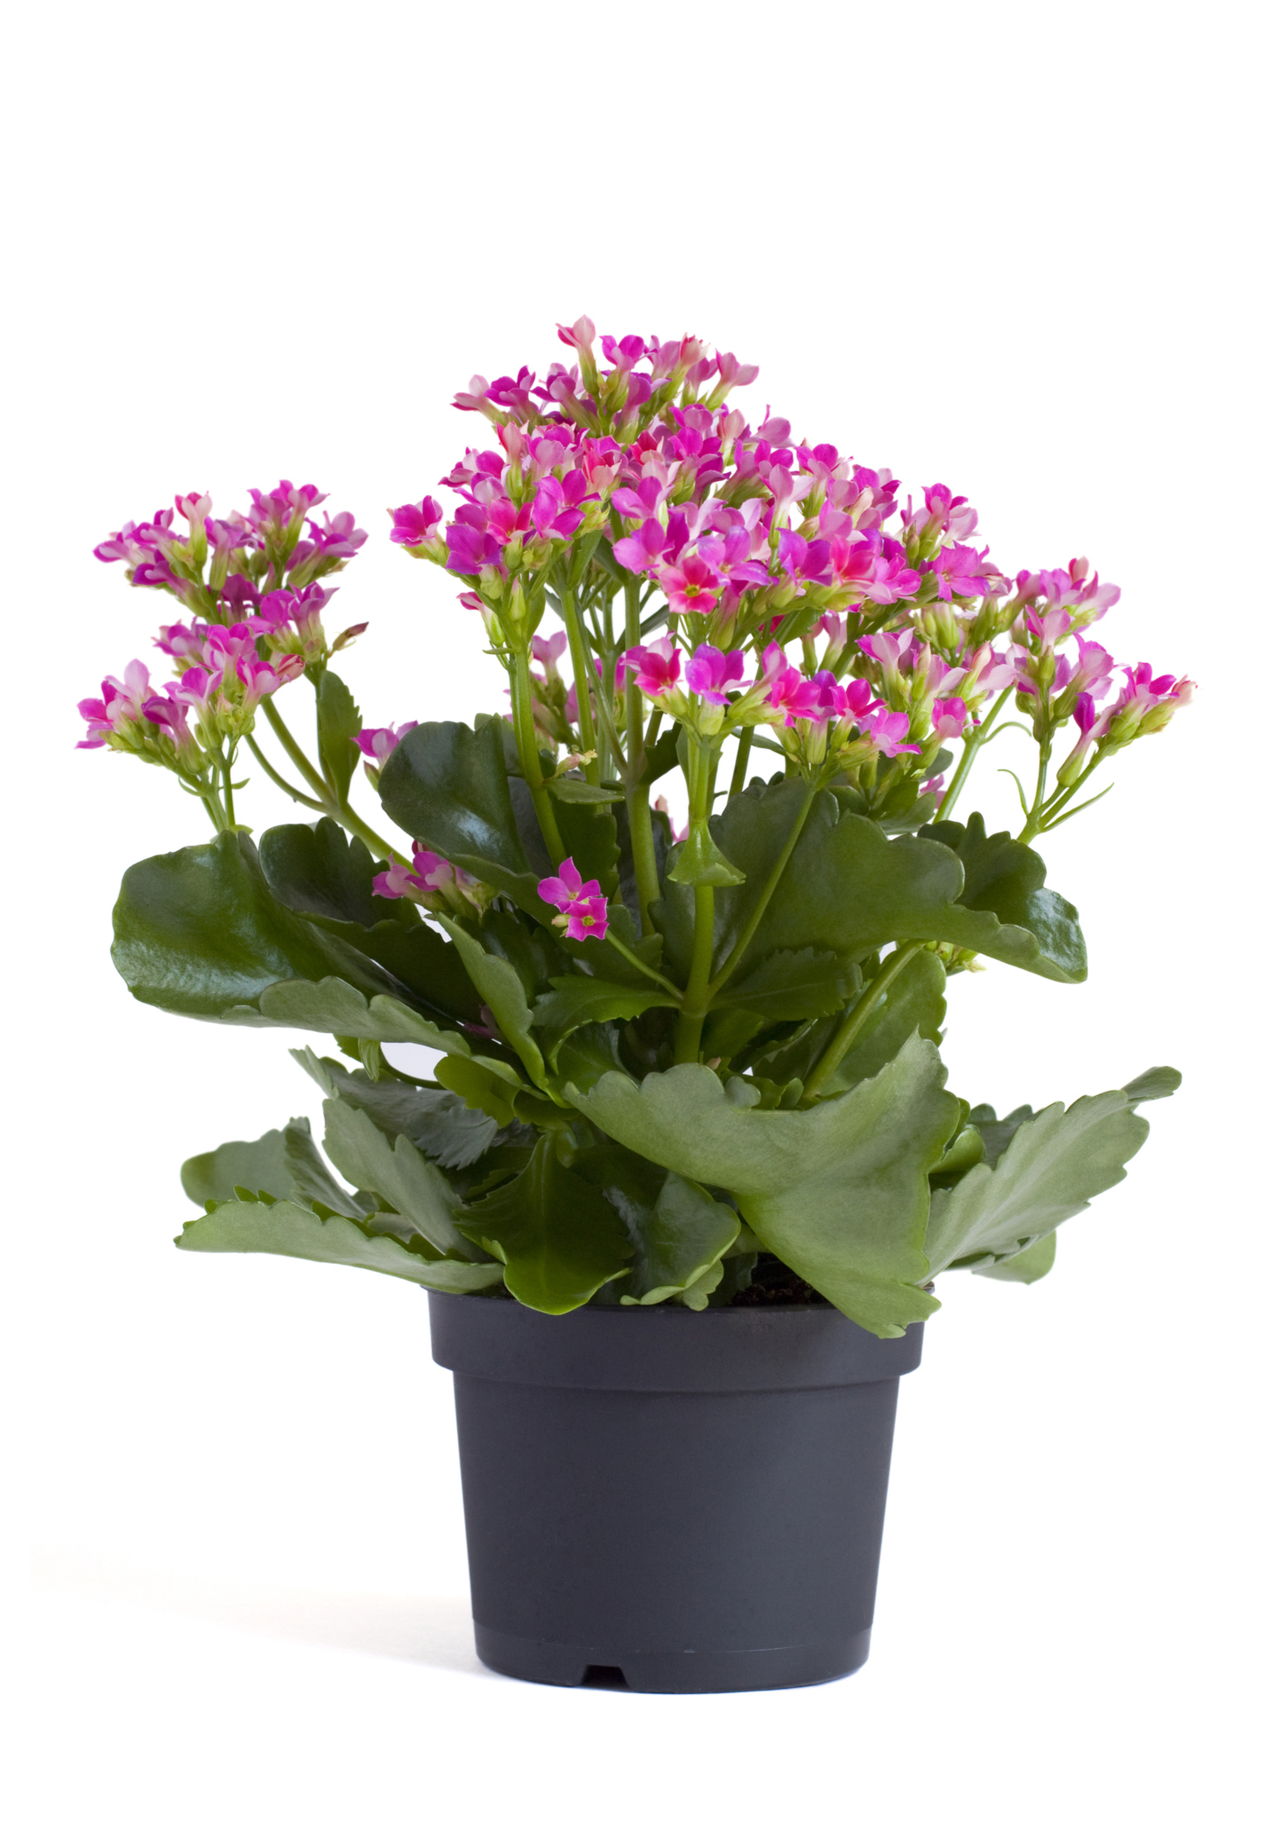 Extremely Amazing Facts About Kalanchoe Plants